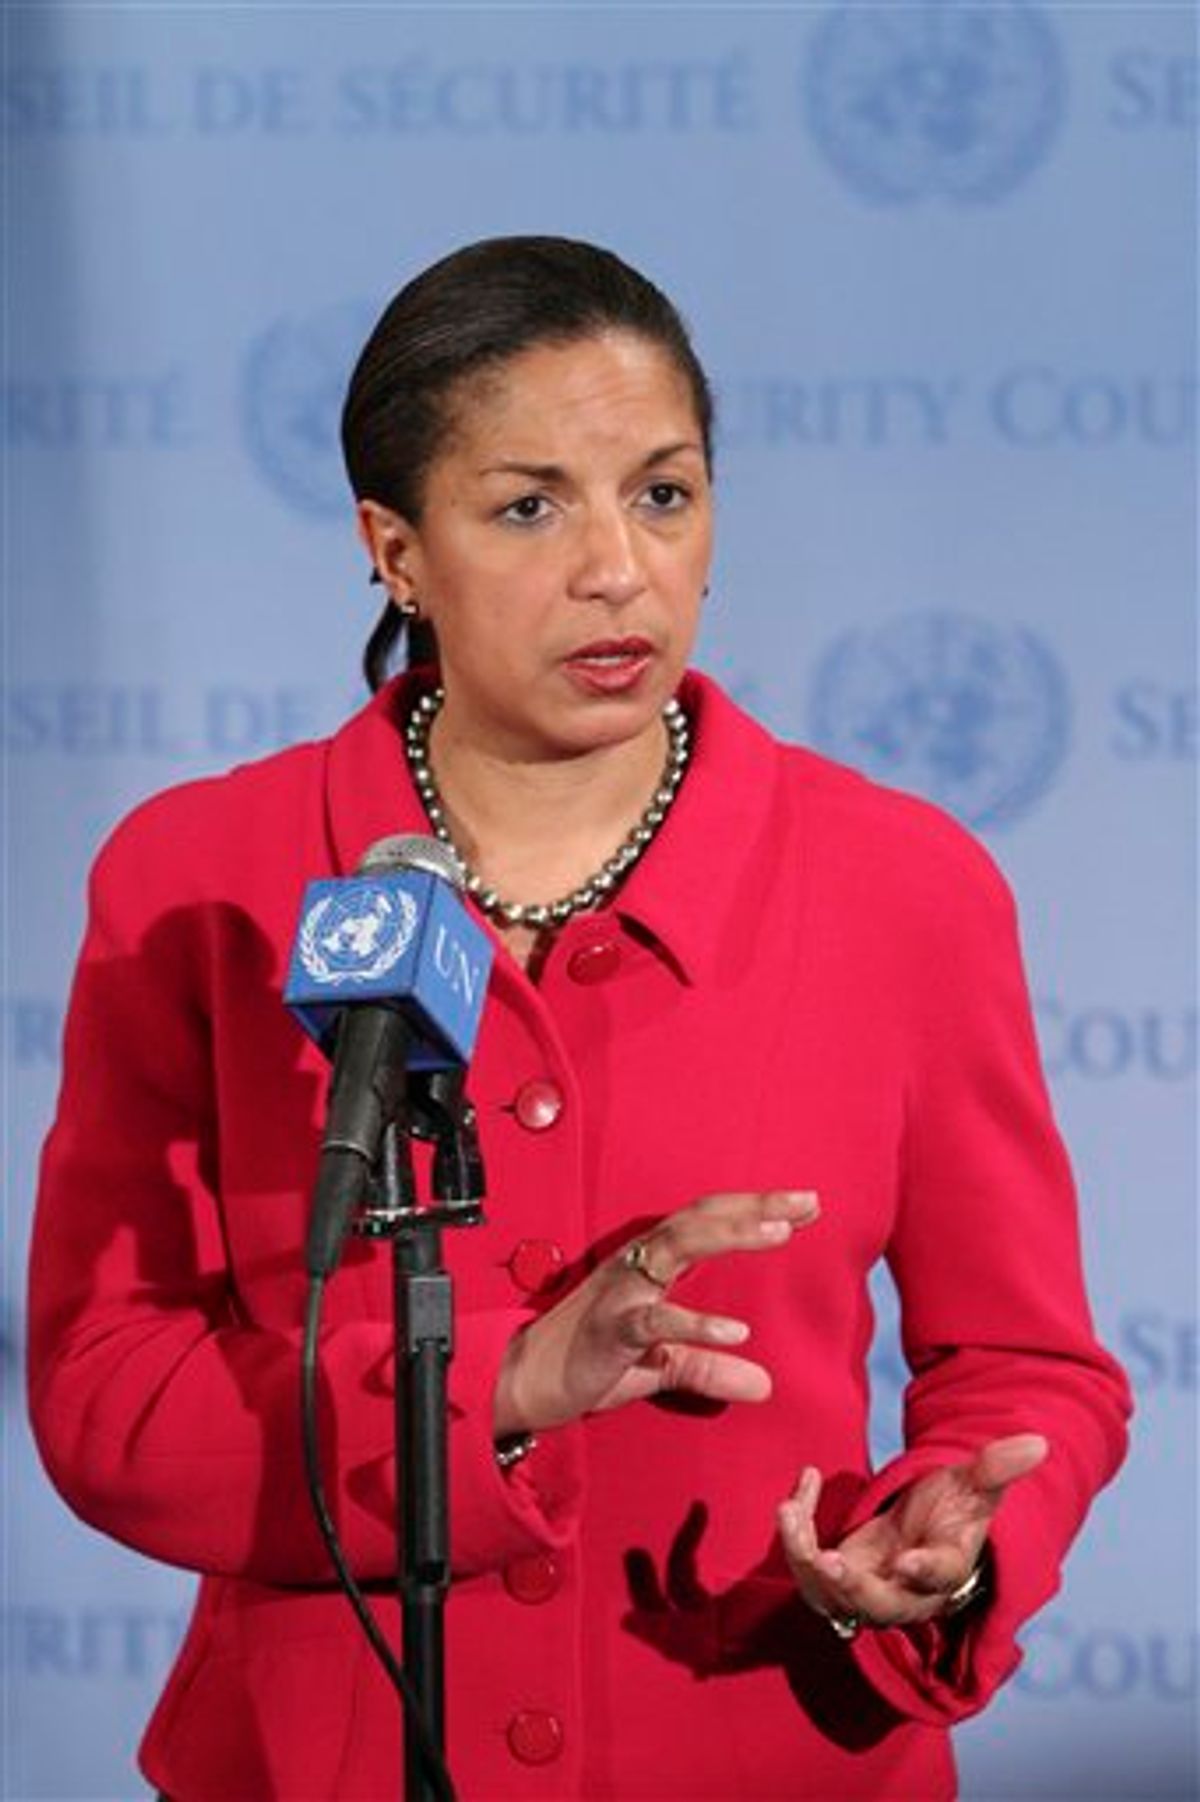 American Ambassador to the U.N. Susan Rice speaks to reporters after a Security Council meeting on the situation in Libya, Wednesday, March 16, 2011 at United Nations headquarters.  (AP Photo) (AP)